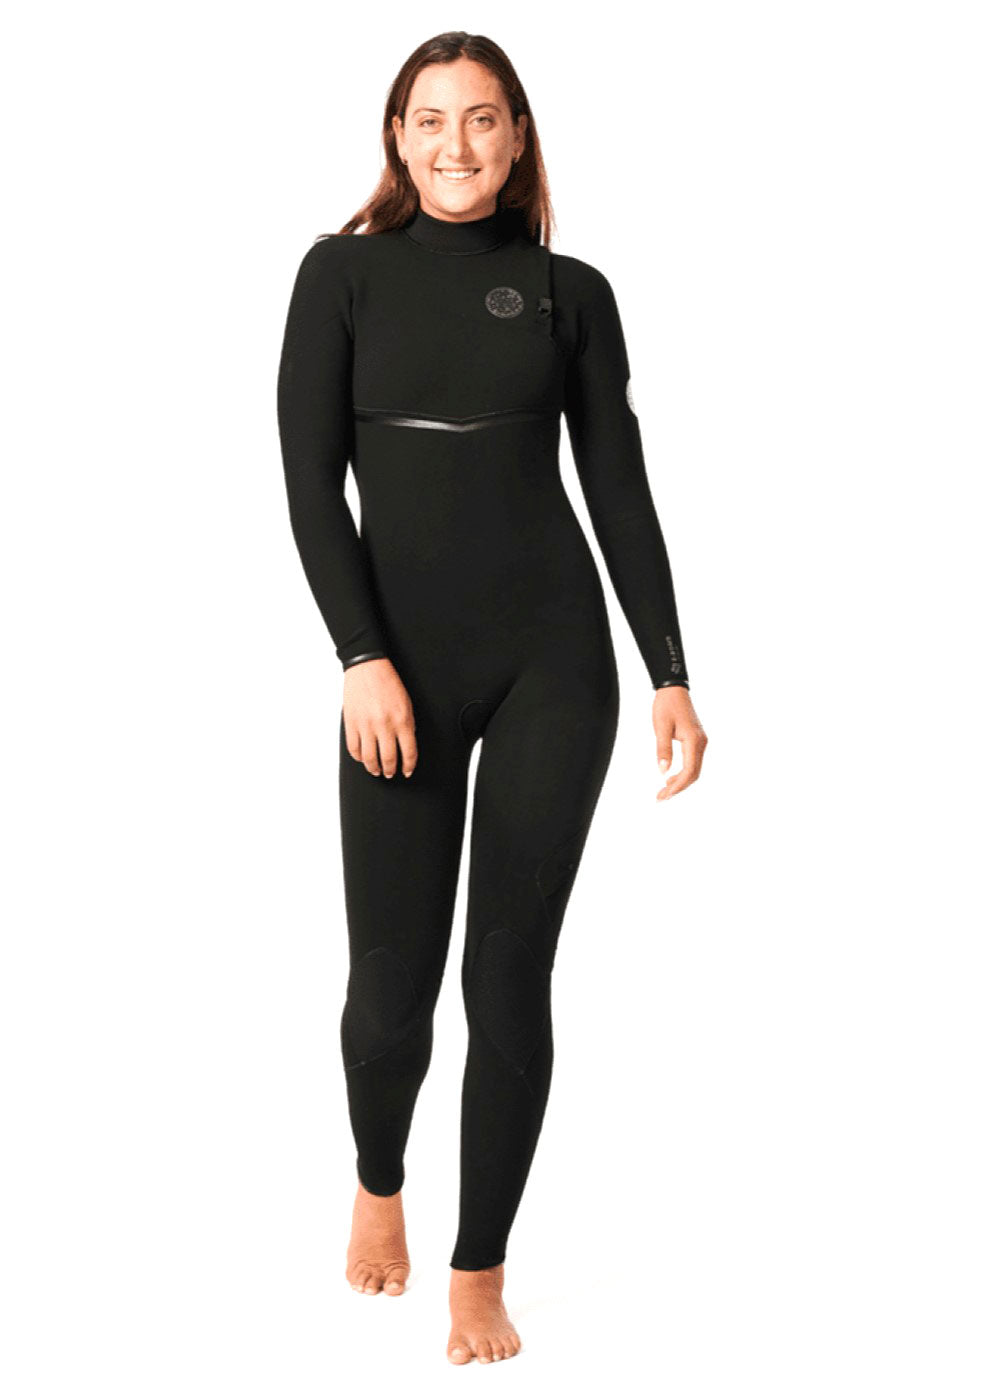 Rip Curl Womens E-bomb ZF 32mm GBS Steamer Wetsuit